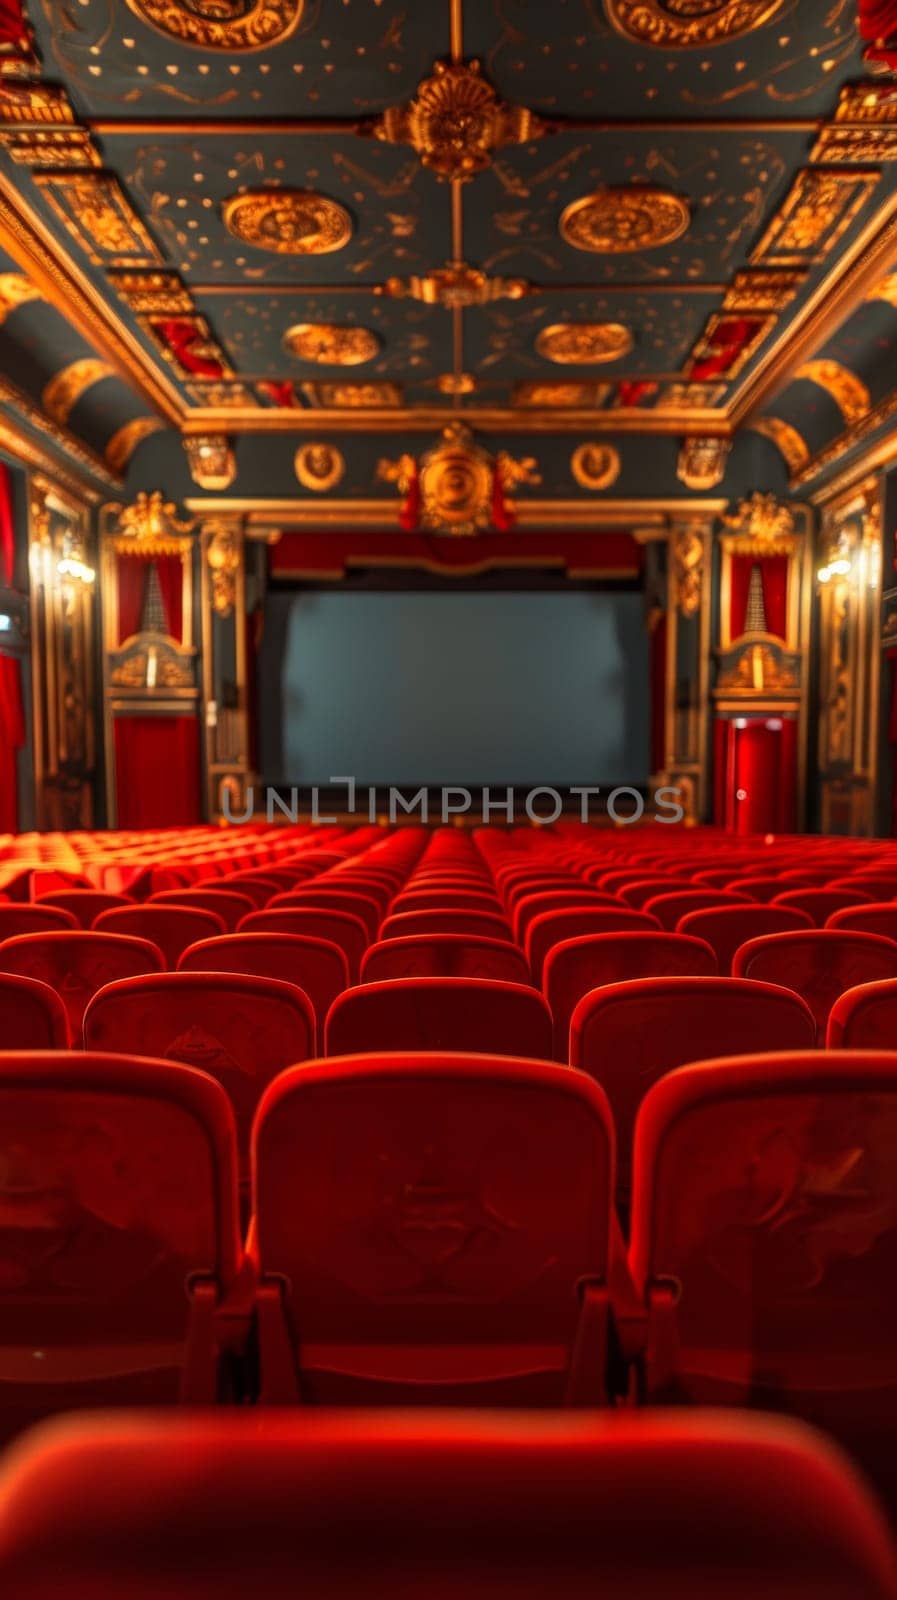 A view of a theater with red seats and gold decorations